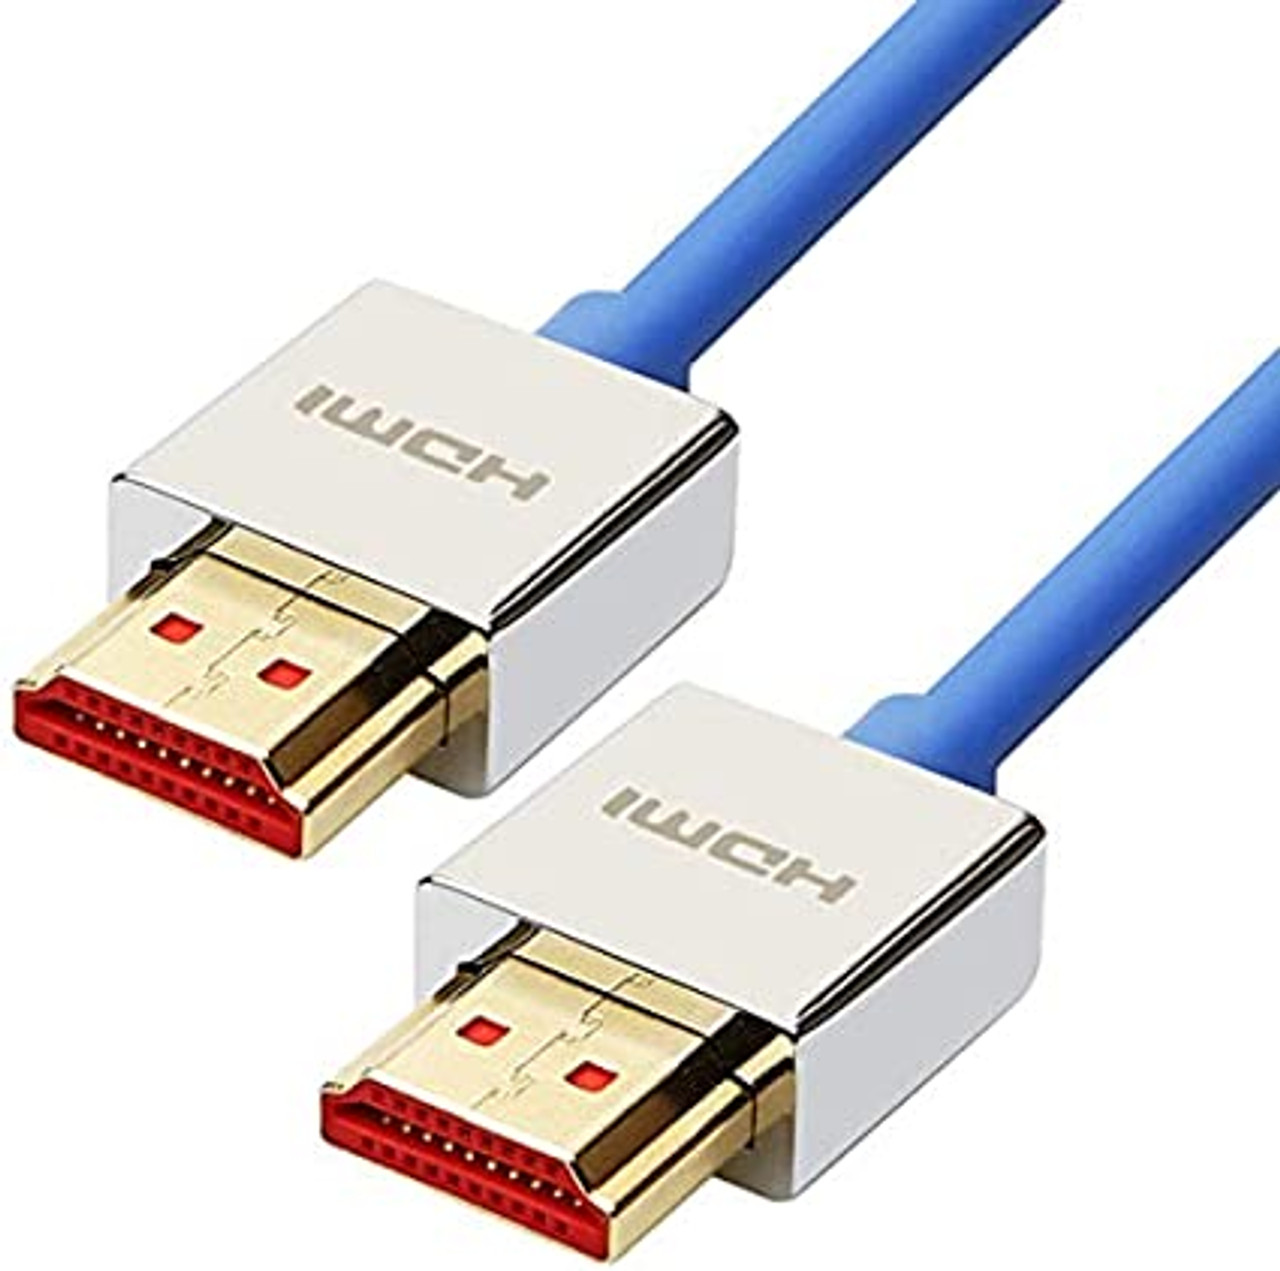 4K HDMI 2.0 Slim Cable 4FT UHD 4K 60Hz with HDR Slim Cord High Speed 18Gbps Ethernet & Audio Return Video 4K 60Hz 1080p 120Hz 3D Compatible with Xbox X, Playstation Pro, Apple TV 4K (4FT)